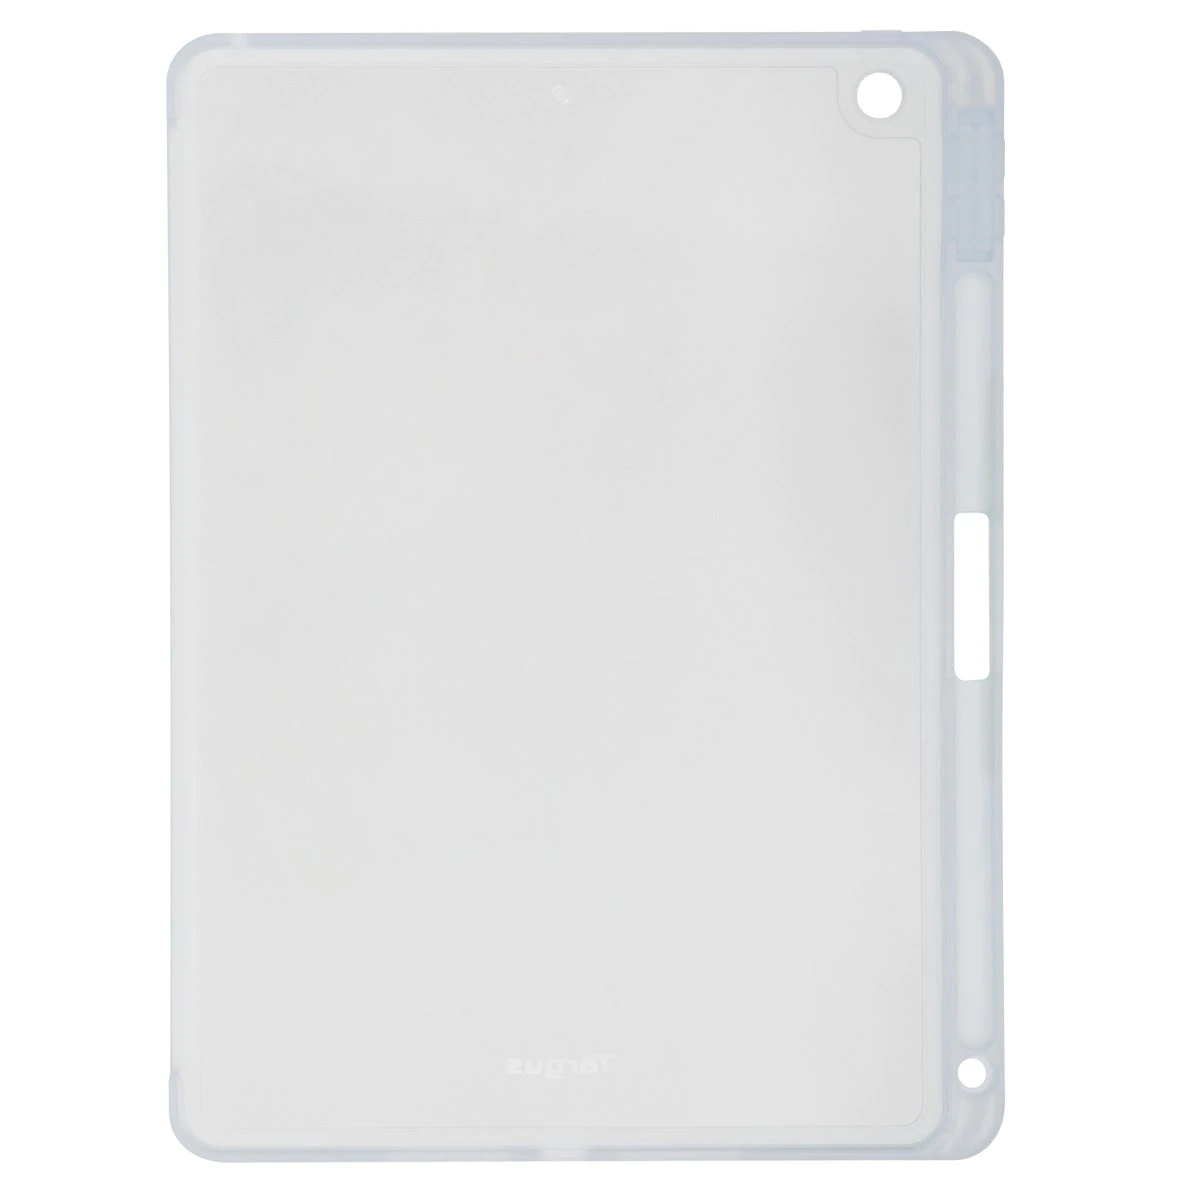 targus-tablet-cases-targus-safeport-antimicrobial-back-cover-for-ipad-10-2-inch-clear-thd514gl-32580673667270.jpg